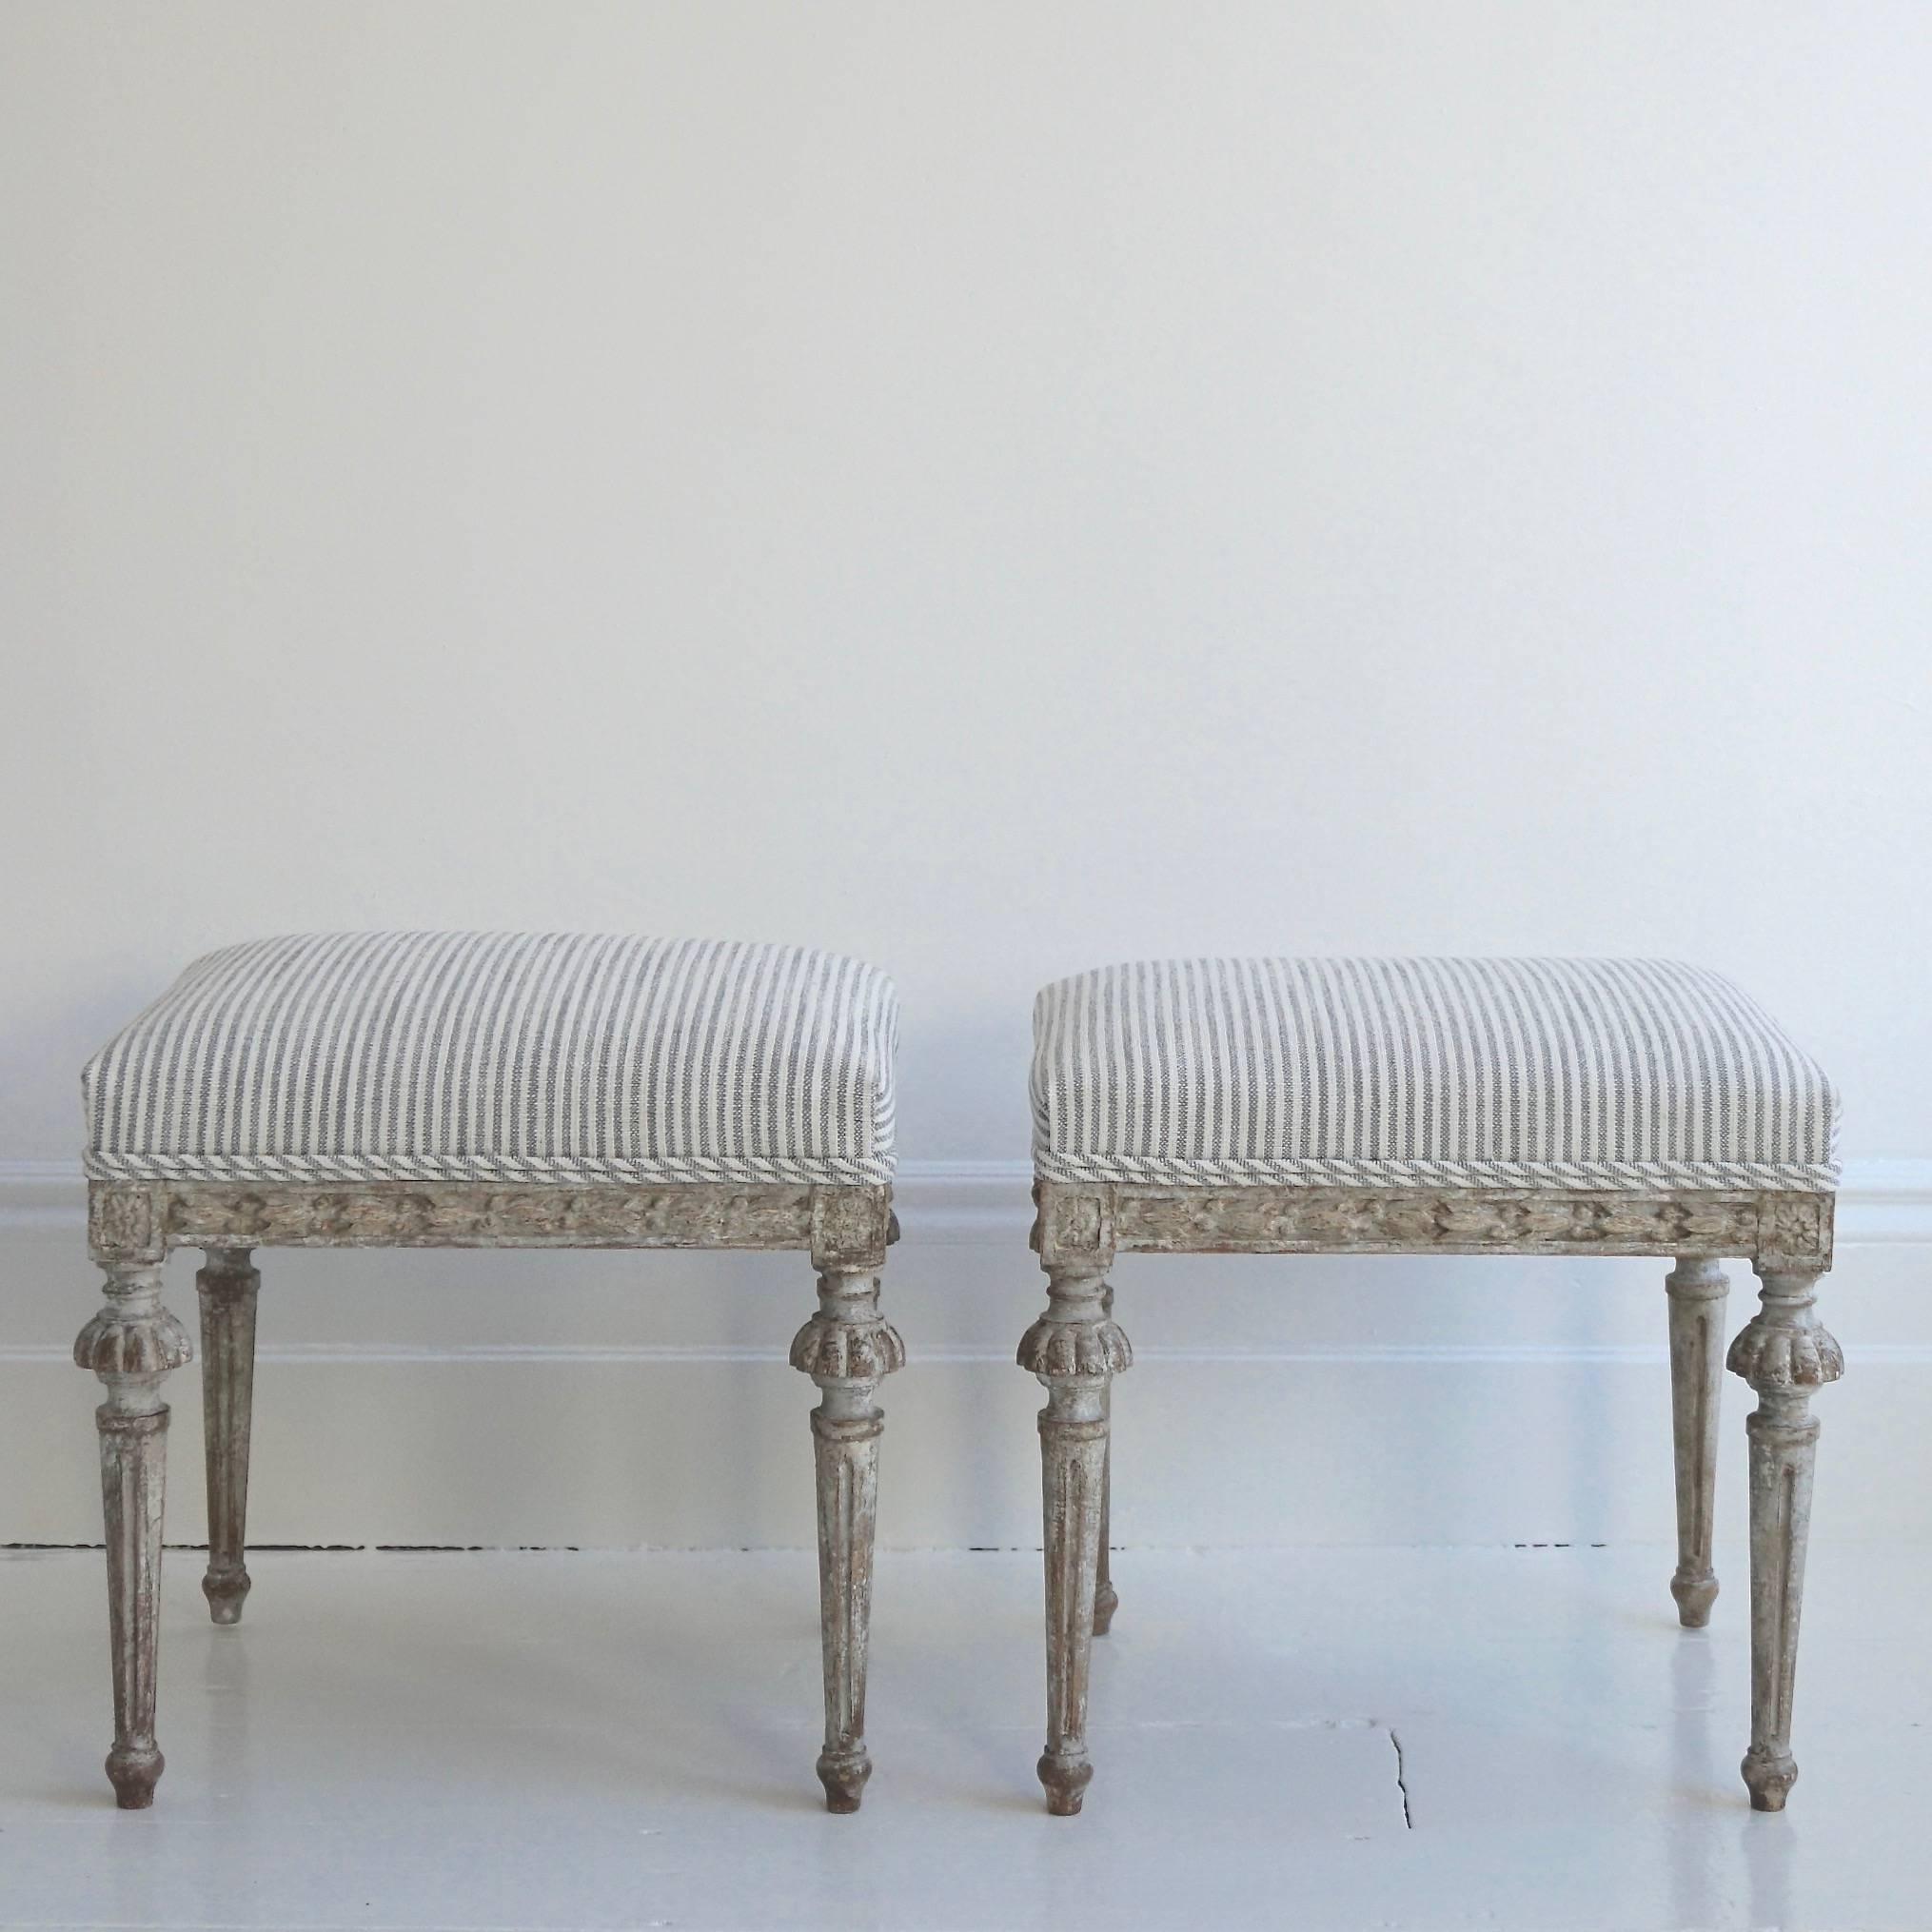 Hand-Carved Pair of Early 19th Century, Swedish, Gustavian Period Stools in Original Paint